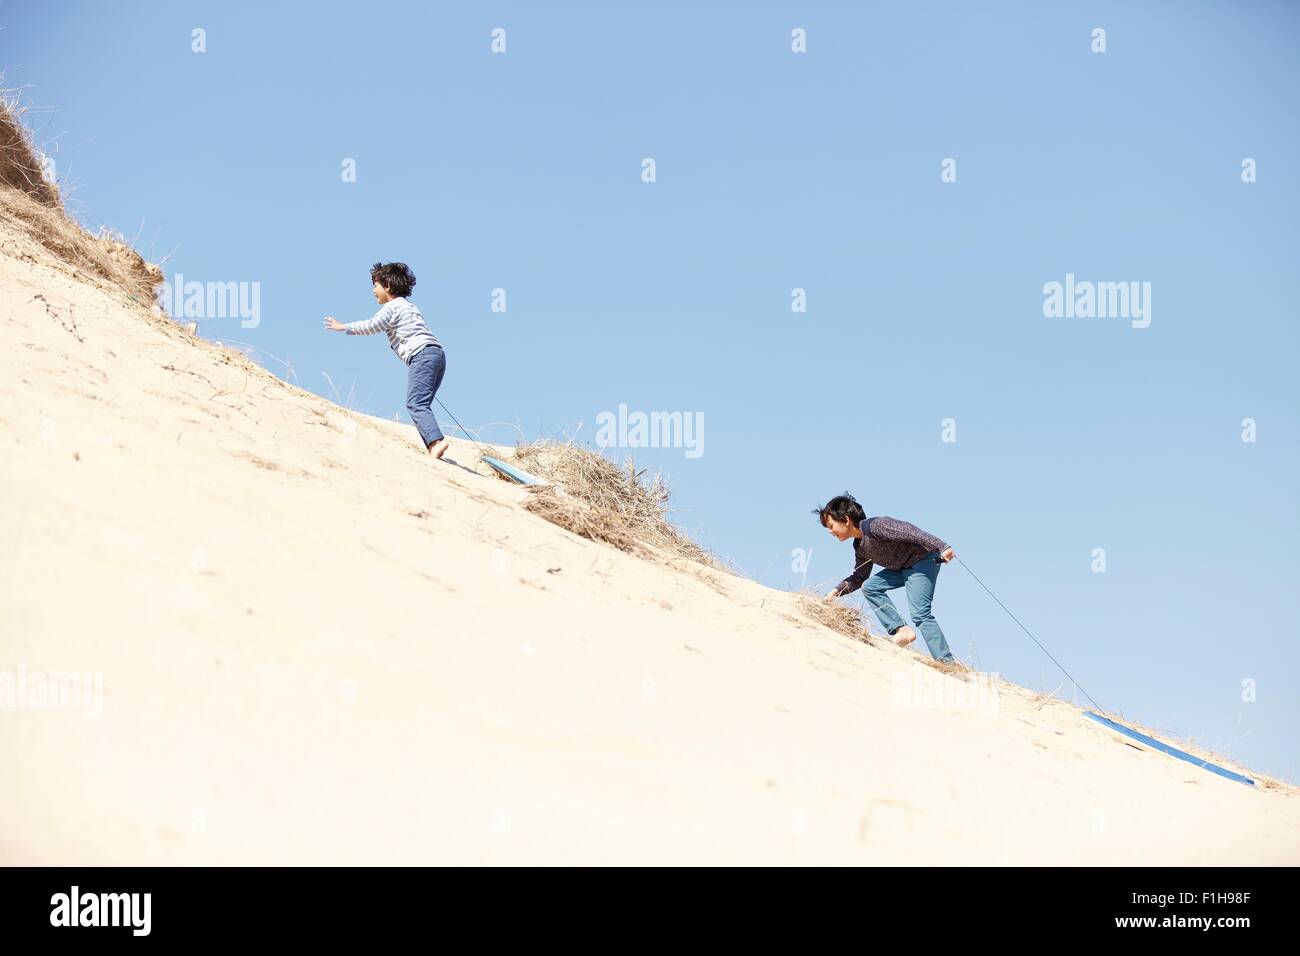 Two young boys climbing sandy hill, pulling sledges behind them Stock Photo